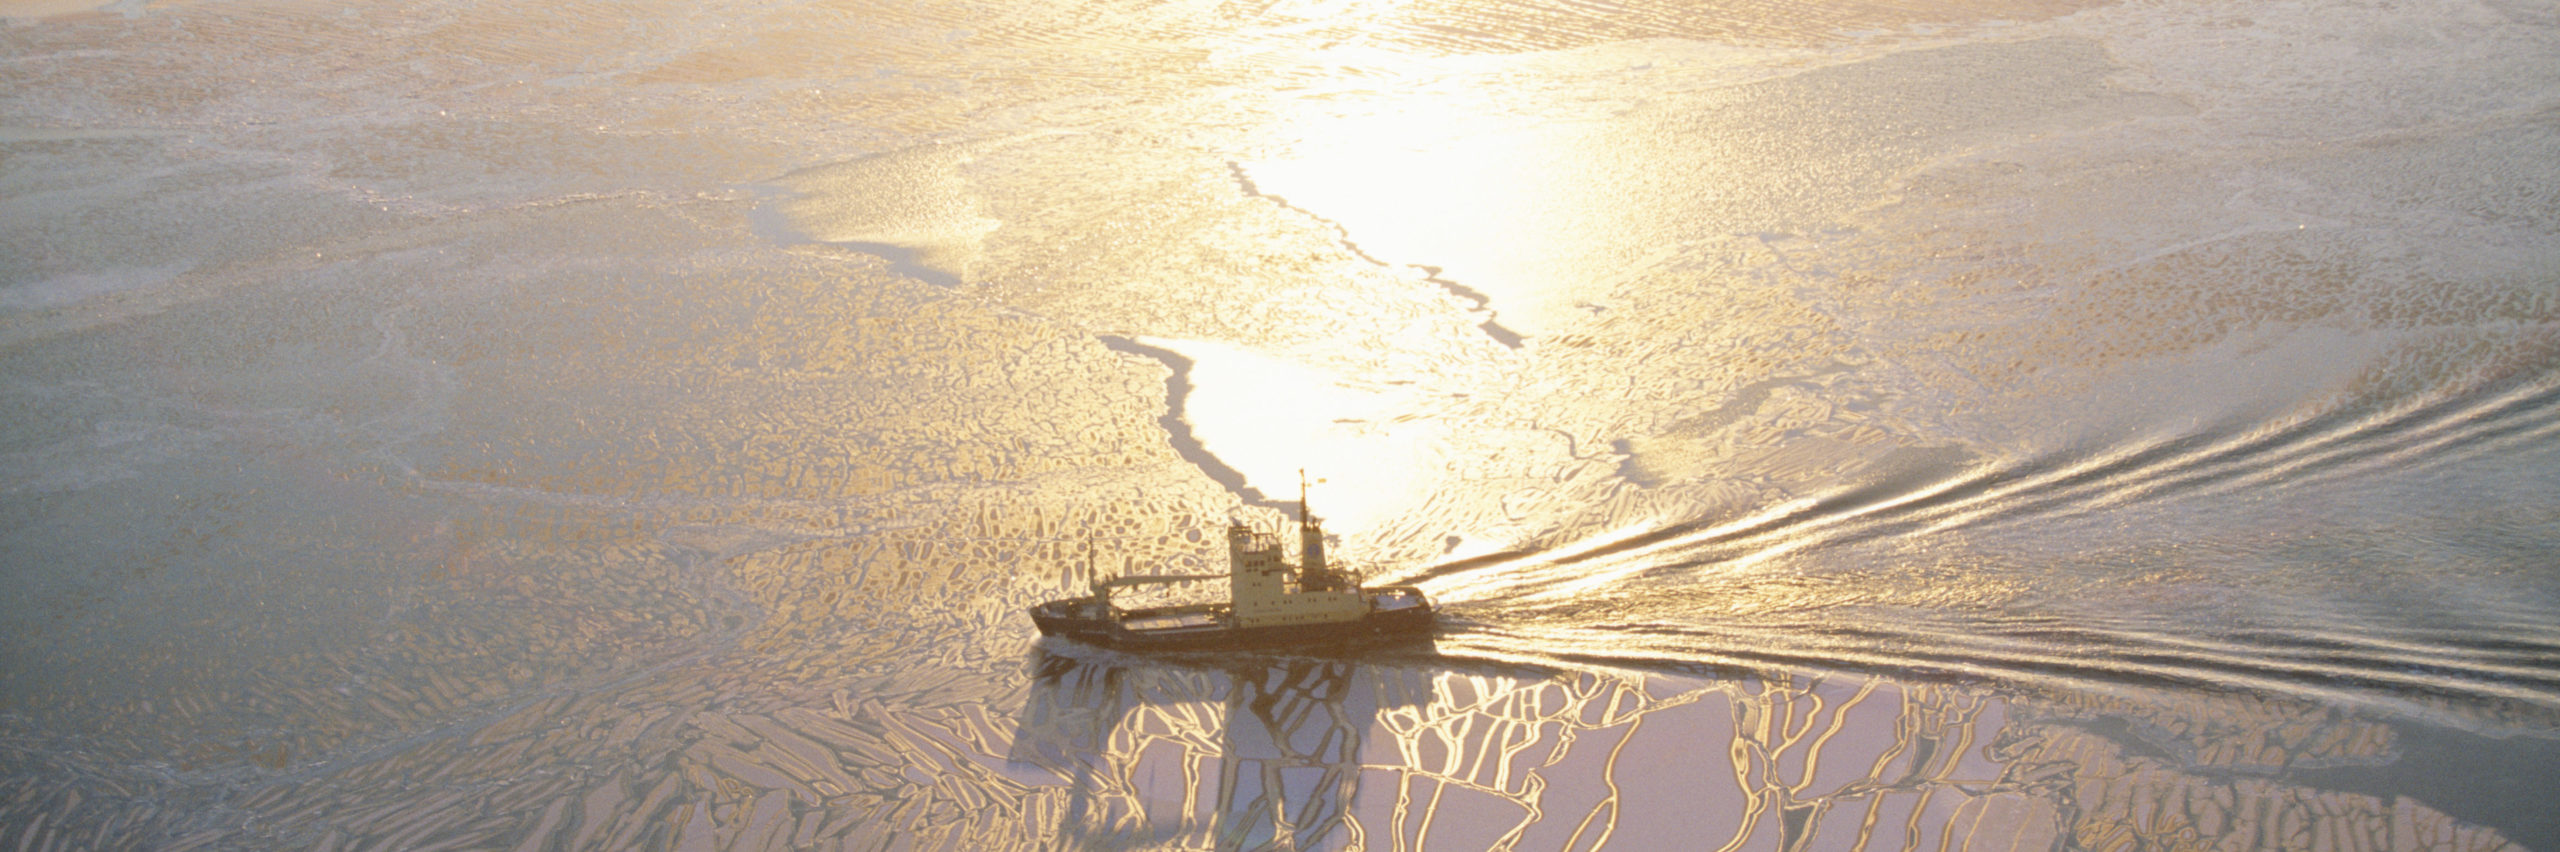 Ship moving in frozen sea - Image